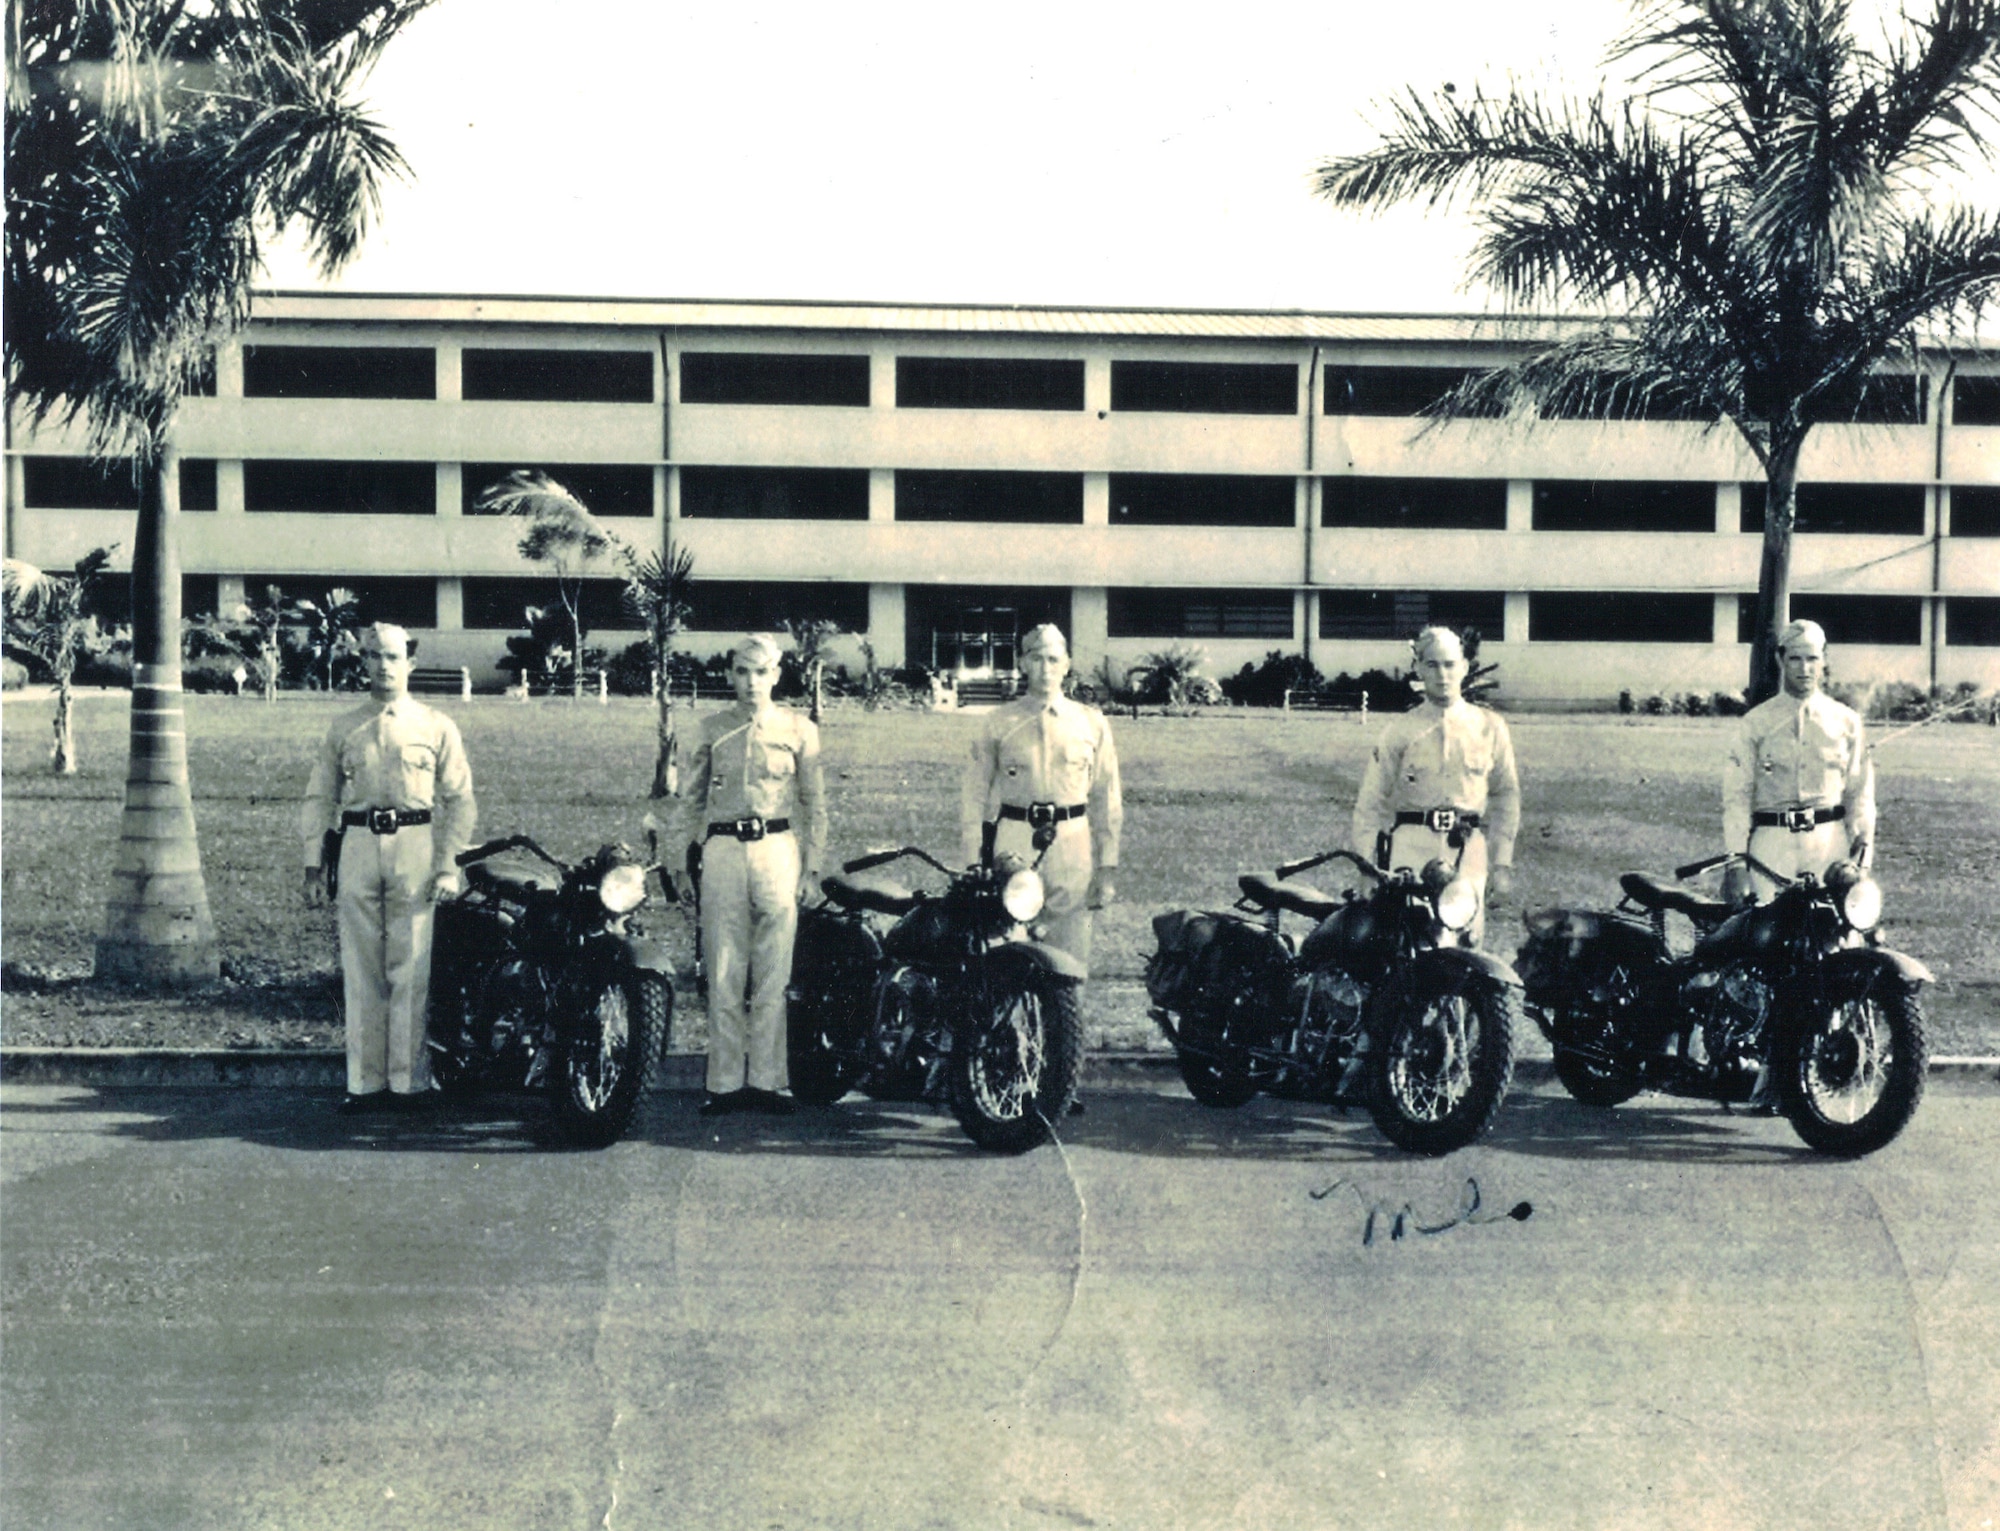 Durward Swanson, third from the left, stands with his patrol team in front of the 3,200-man consolidated barracks early 1941 photo at Hickam Field. Swanson was a staff sergeant in the Army Air Corps when the Japanese executed their surprise attack of the military installations on the Hawaiian island of Oahu. Swanson went on to the Battle of Midway in June 1942 as a crew chief, where his B-17 was shot down, leaving him with injuries to his leg, side and face. (Courtesy photo) 